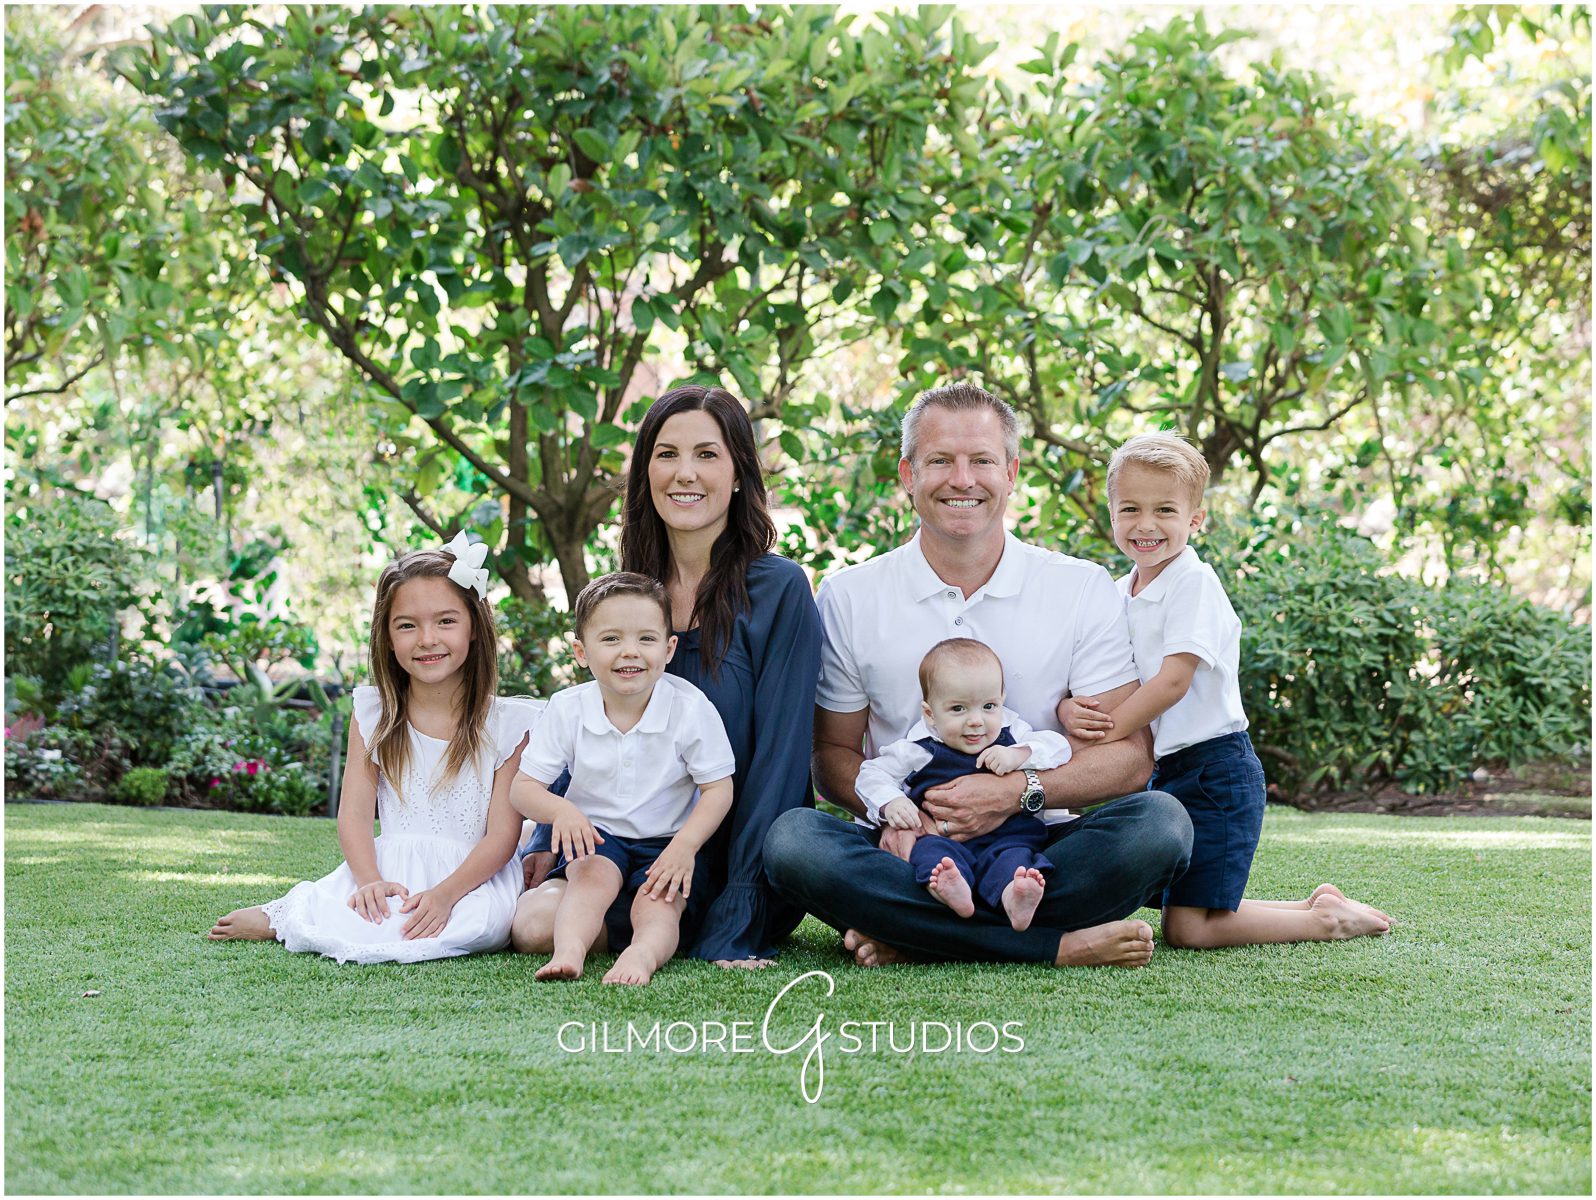 Orange County Family Photography, newport beach photographer, outdoors, park, family photo, portrait, outfits, white shirt, navy blue, group